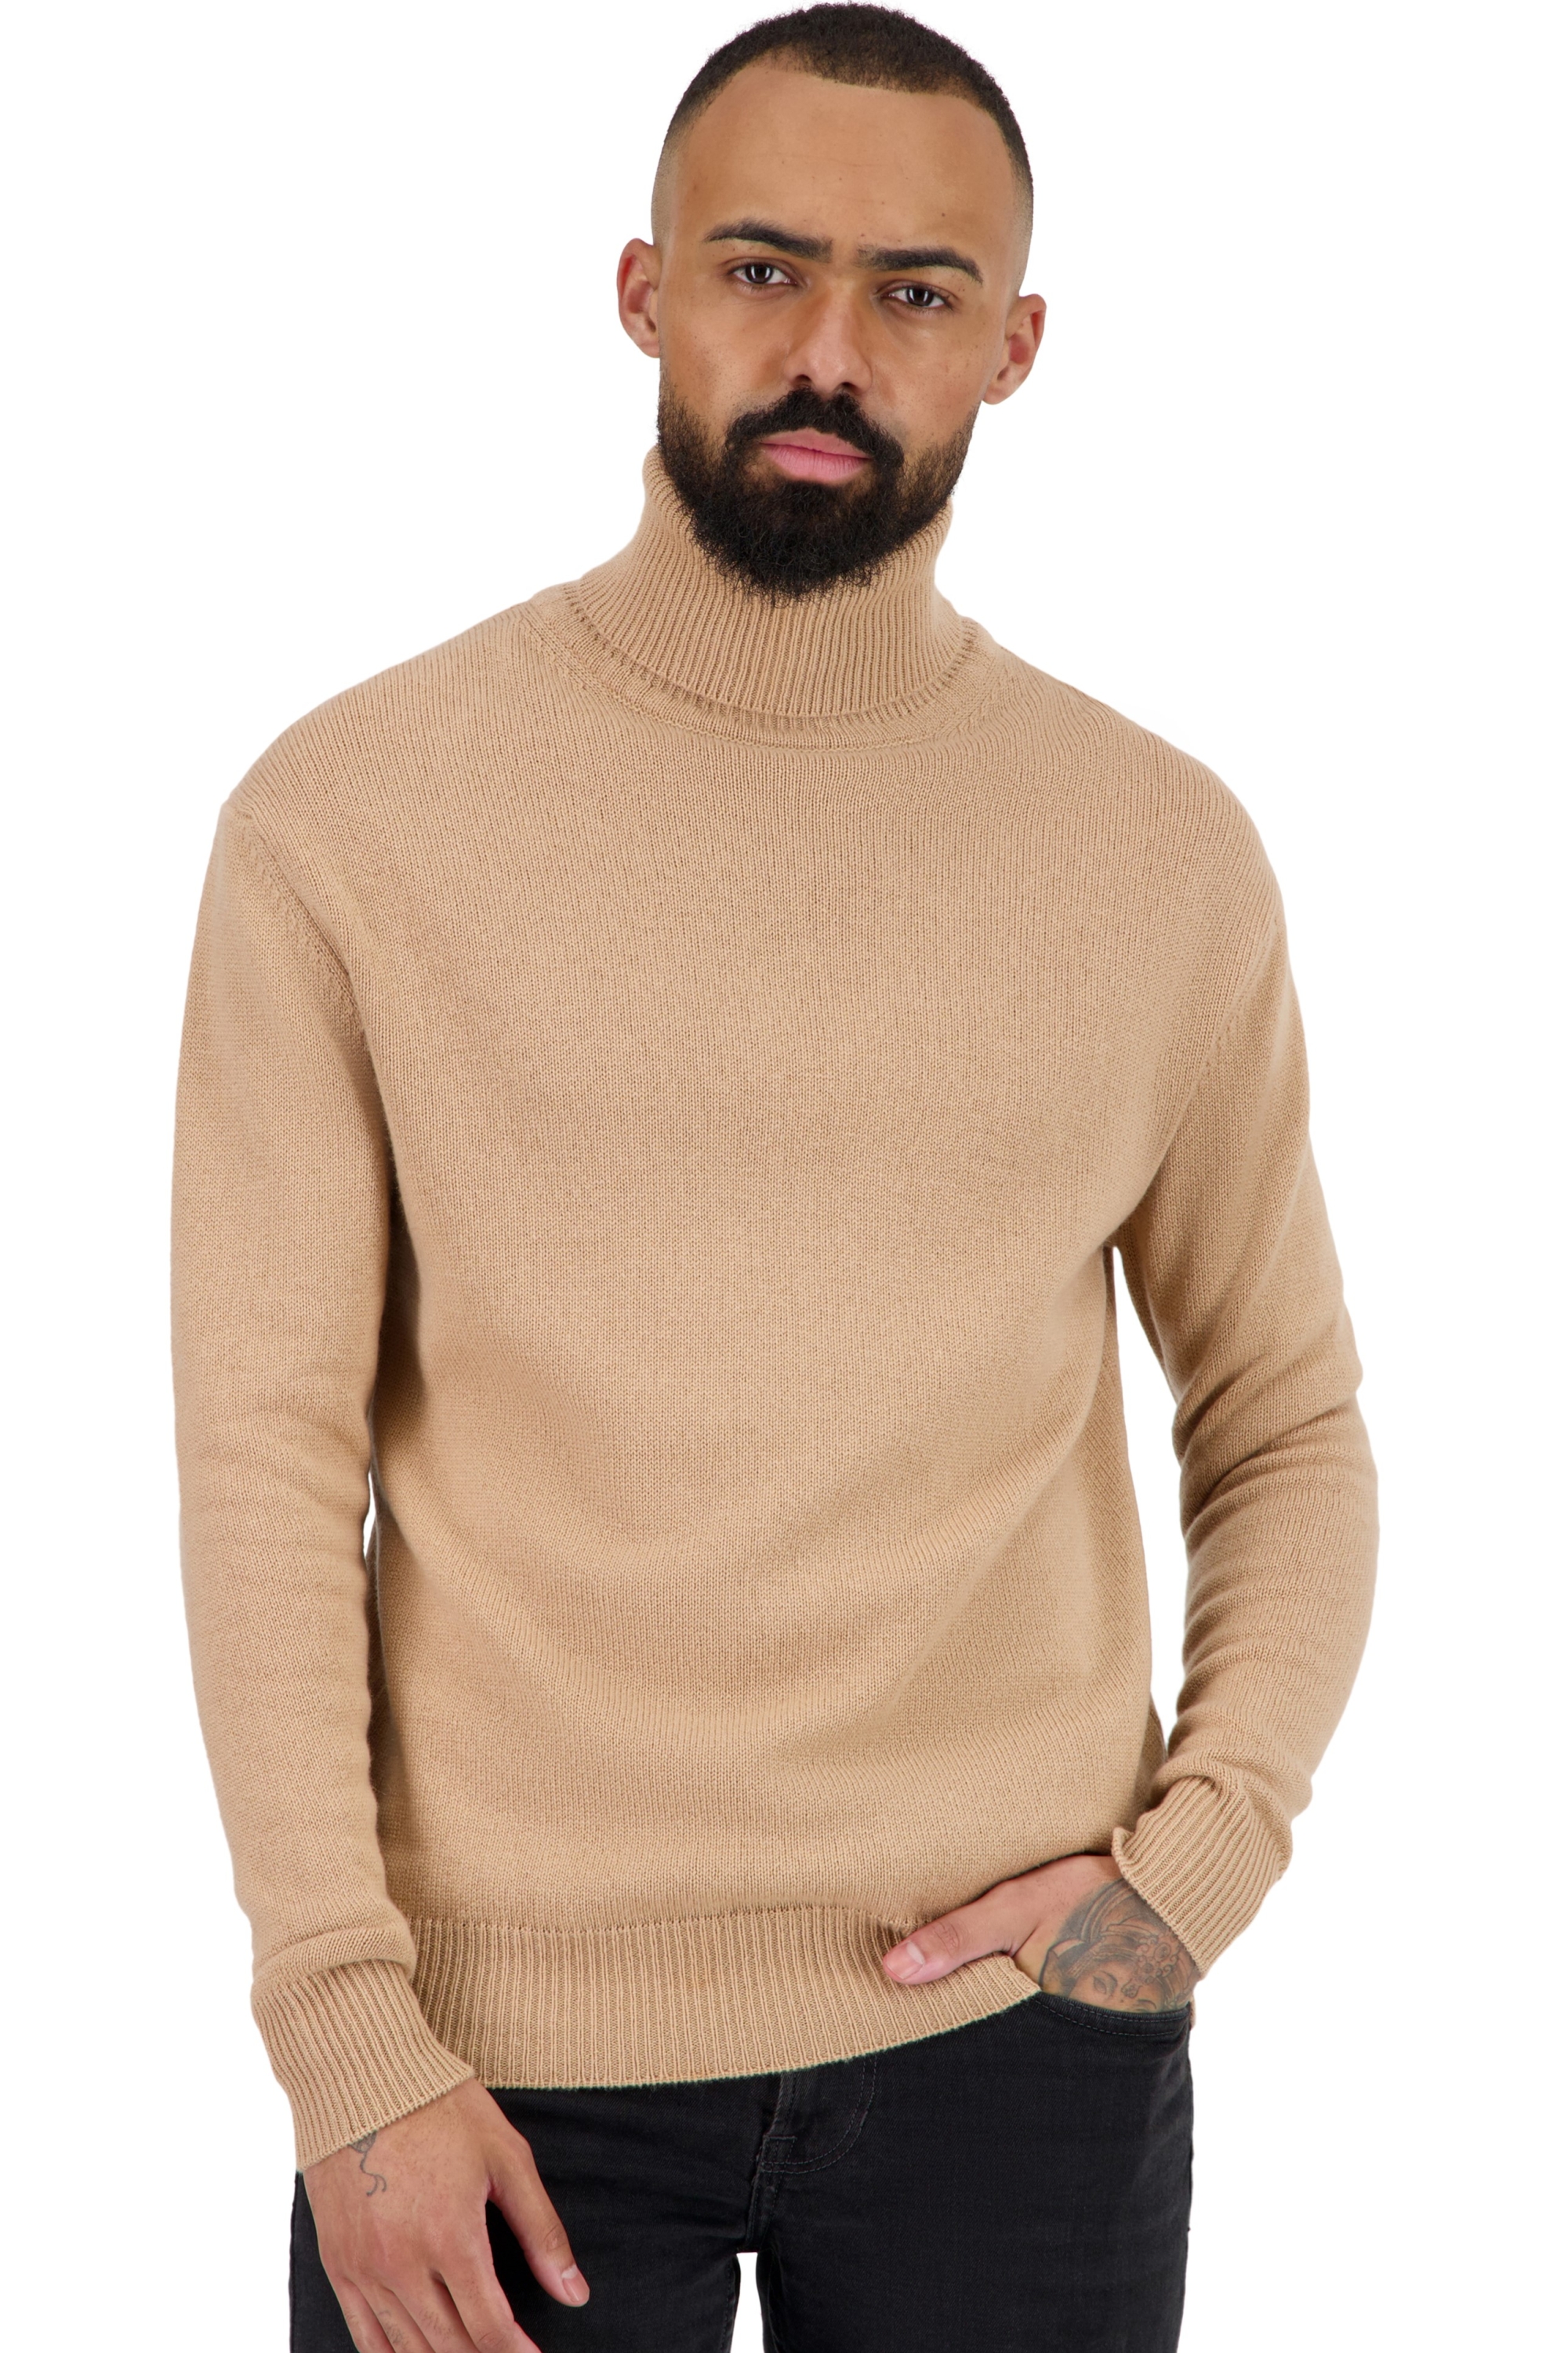 Cashmere men basic sweaters at low prices torino first creme brulee 2xl